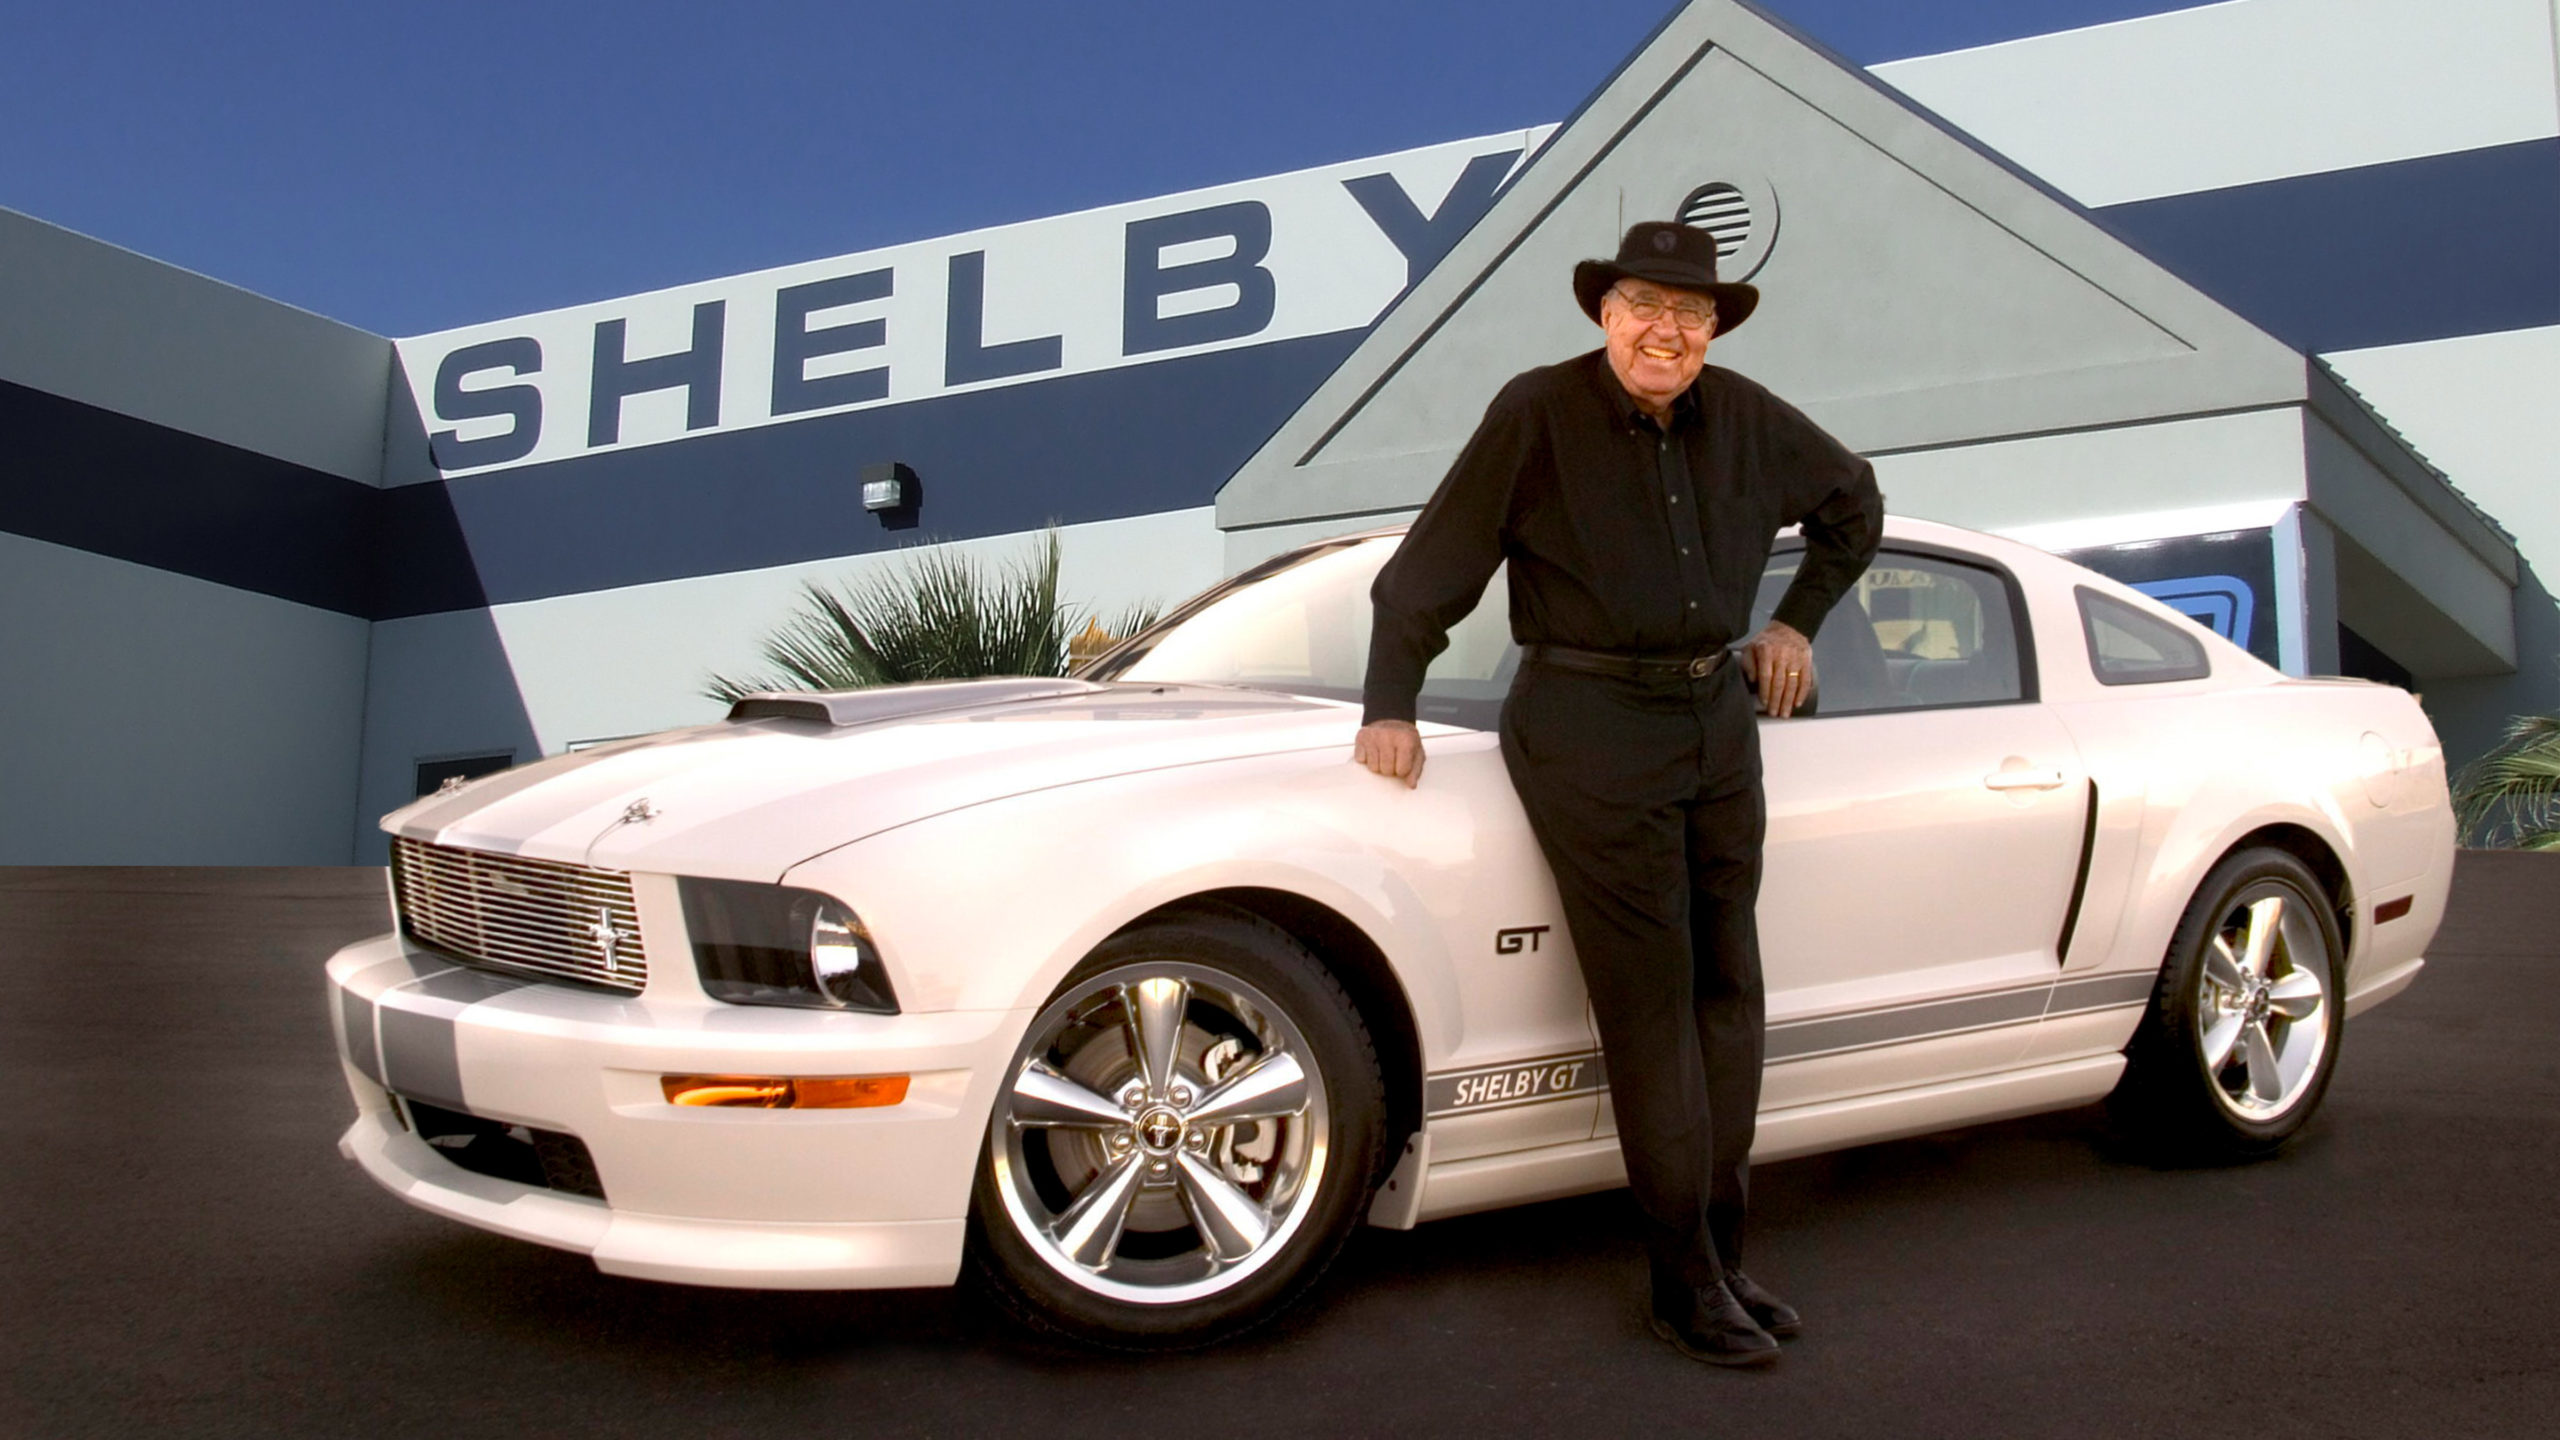 Shelby: A Journey Through Automotive Excellence